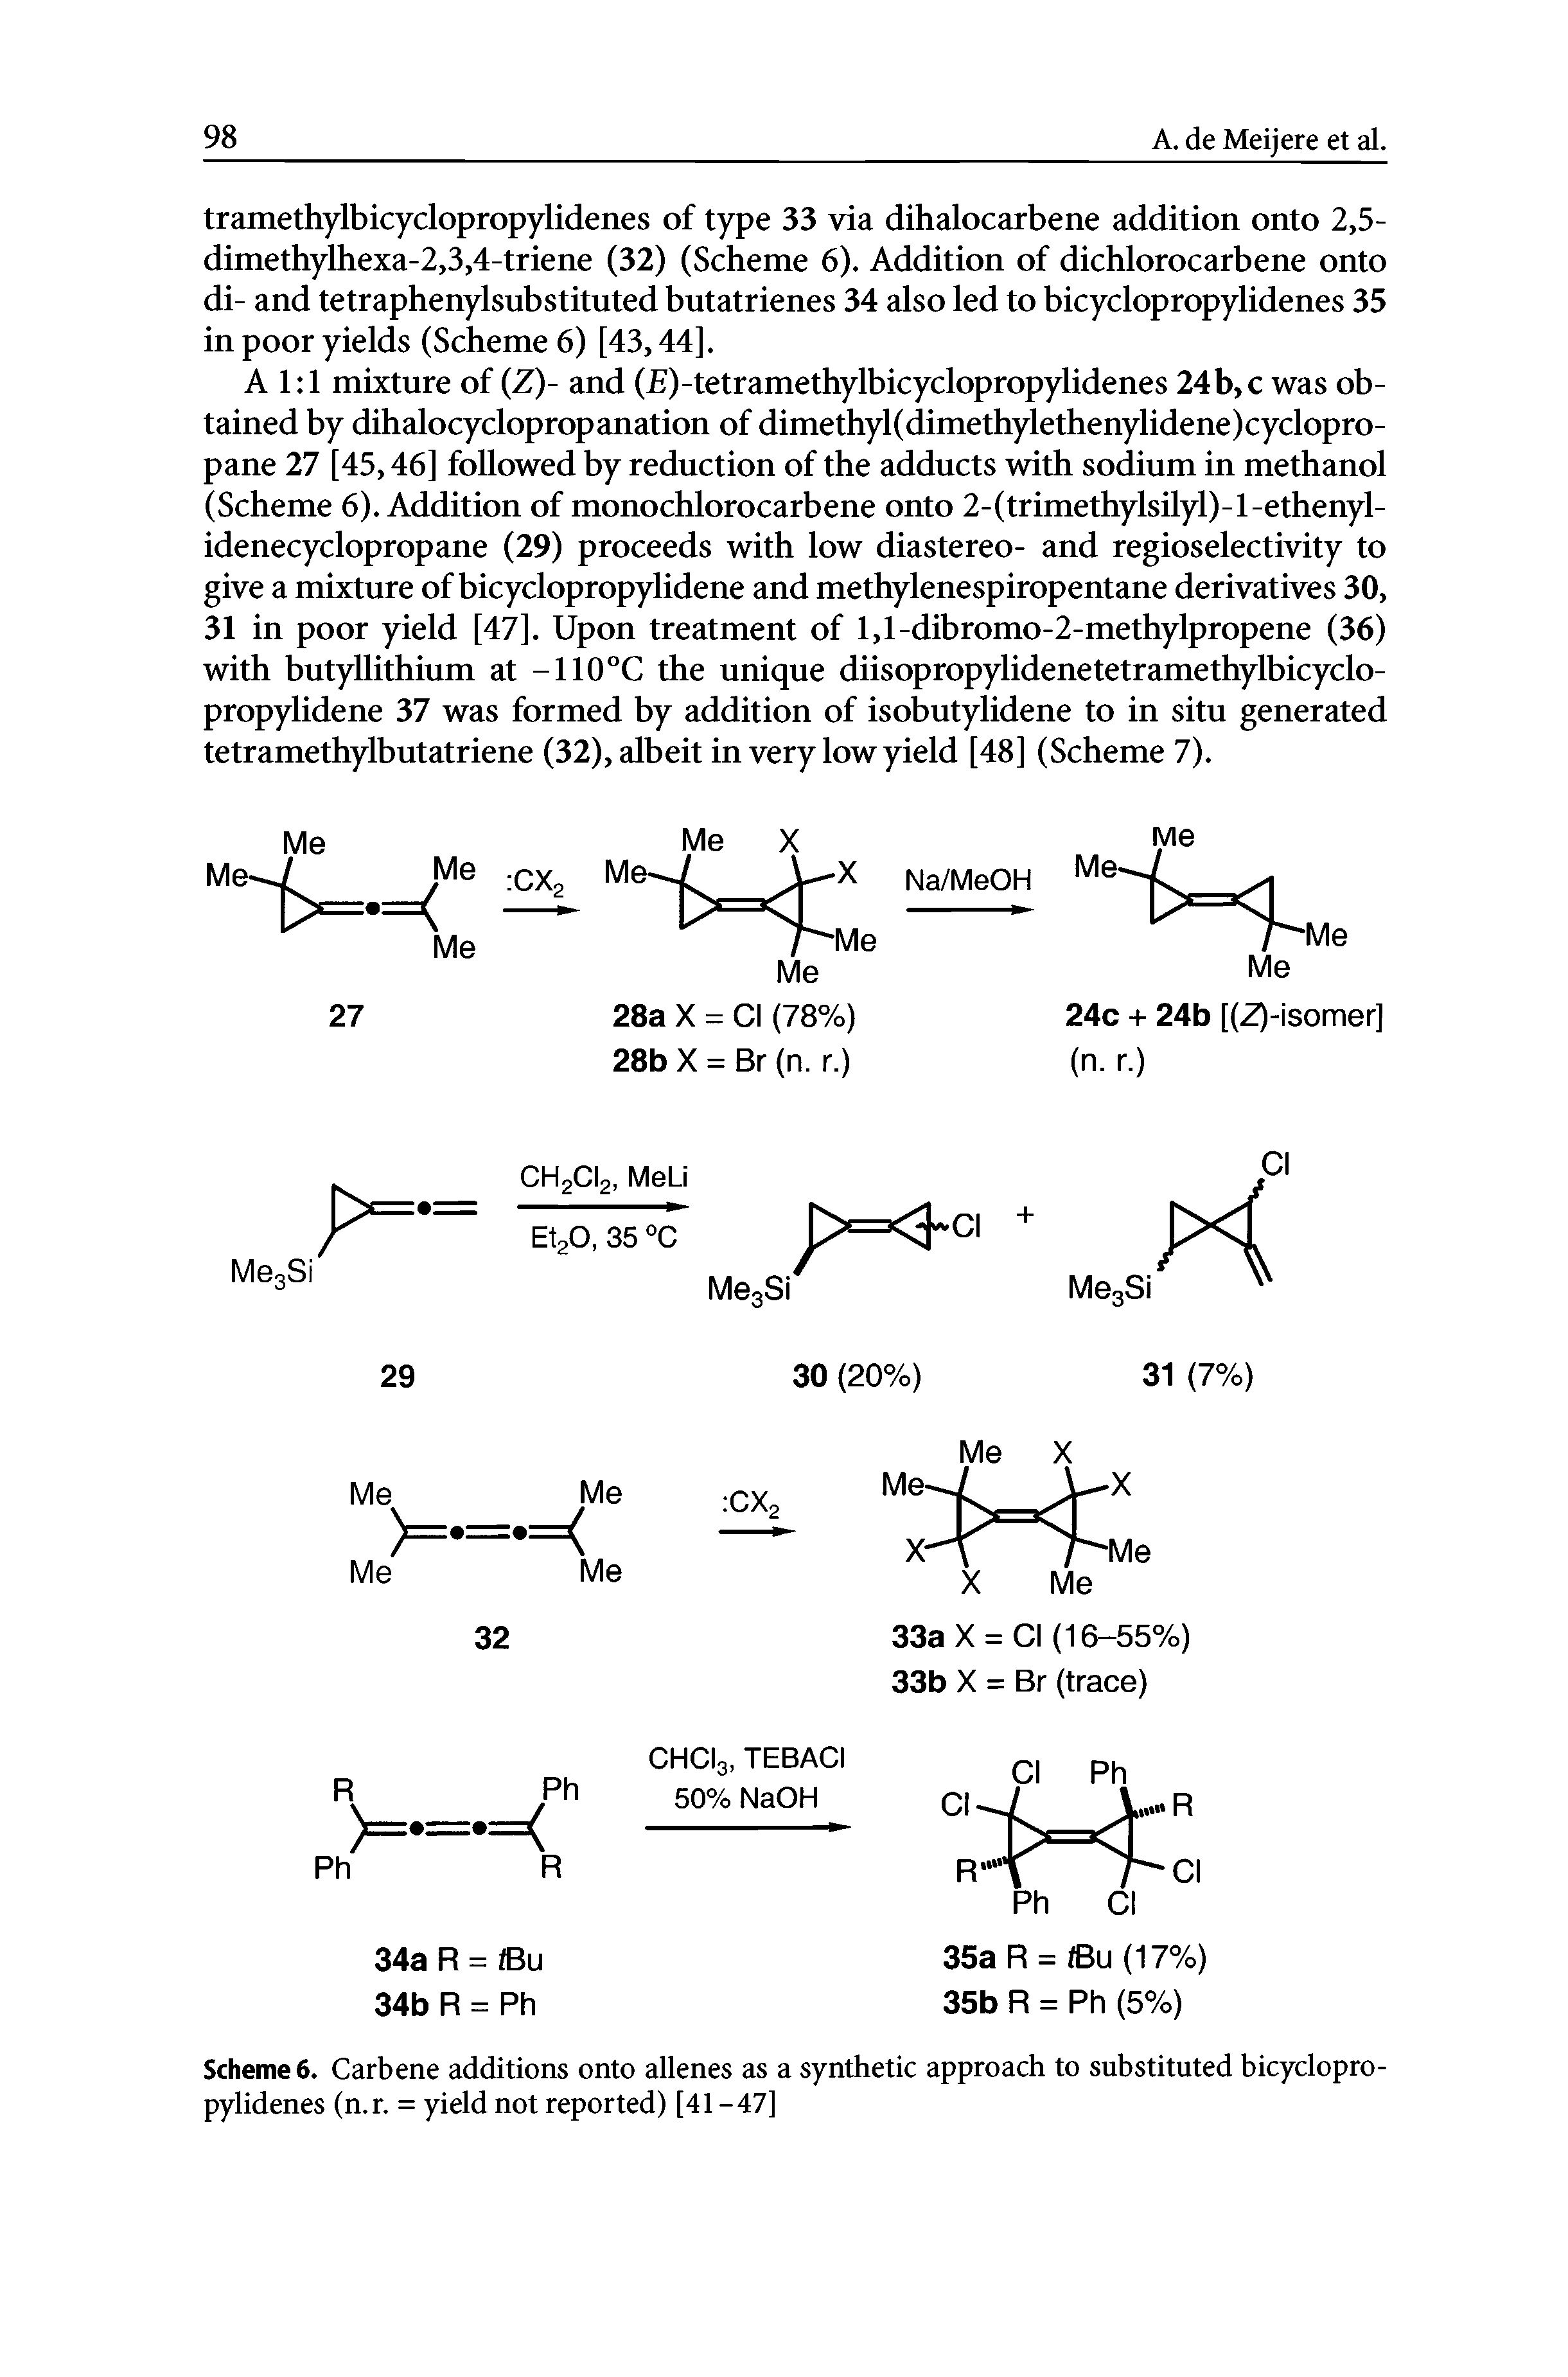 Schemes. Carbene additions onto allenes as a synthetic approach to substituted bicyclopropylidenes (n.r. = yield not reported) [41-47]...